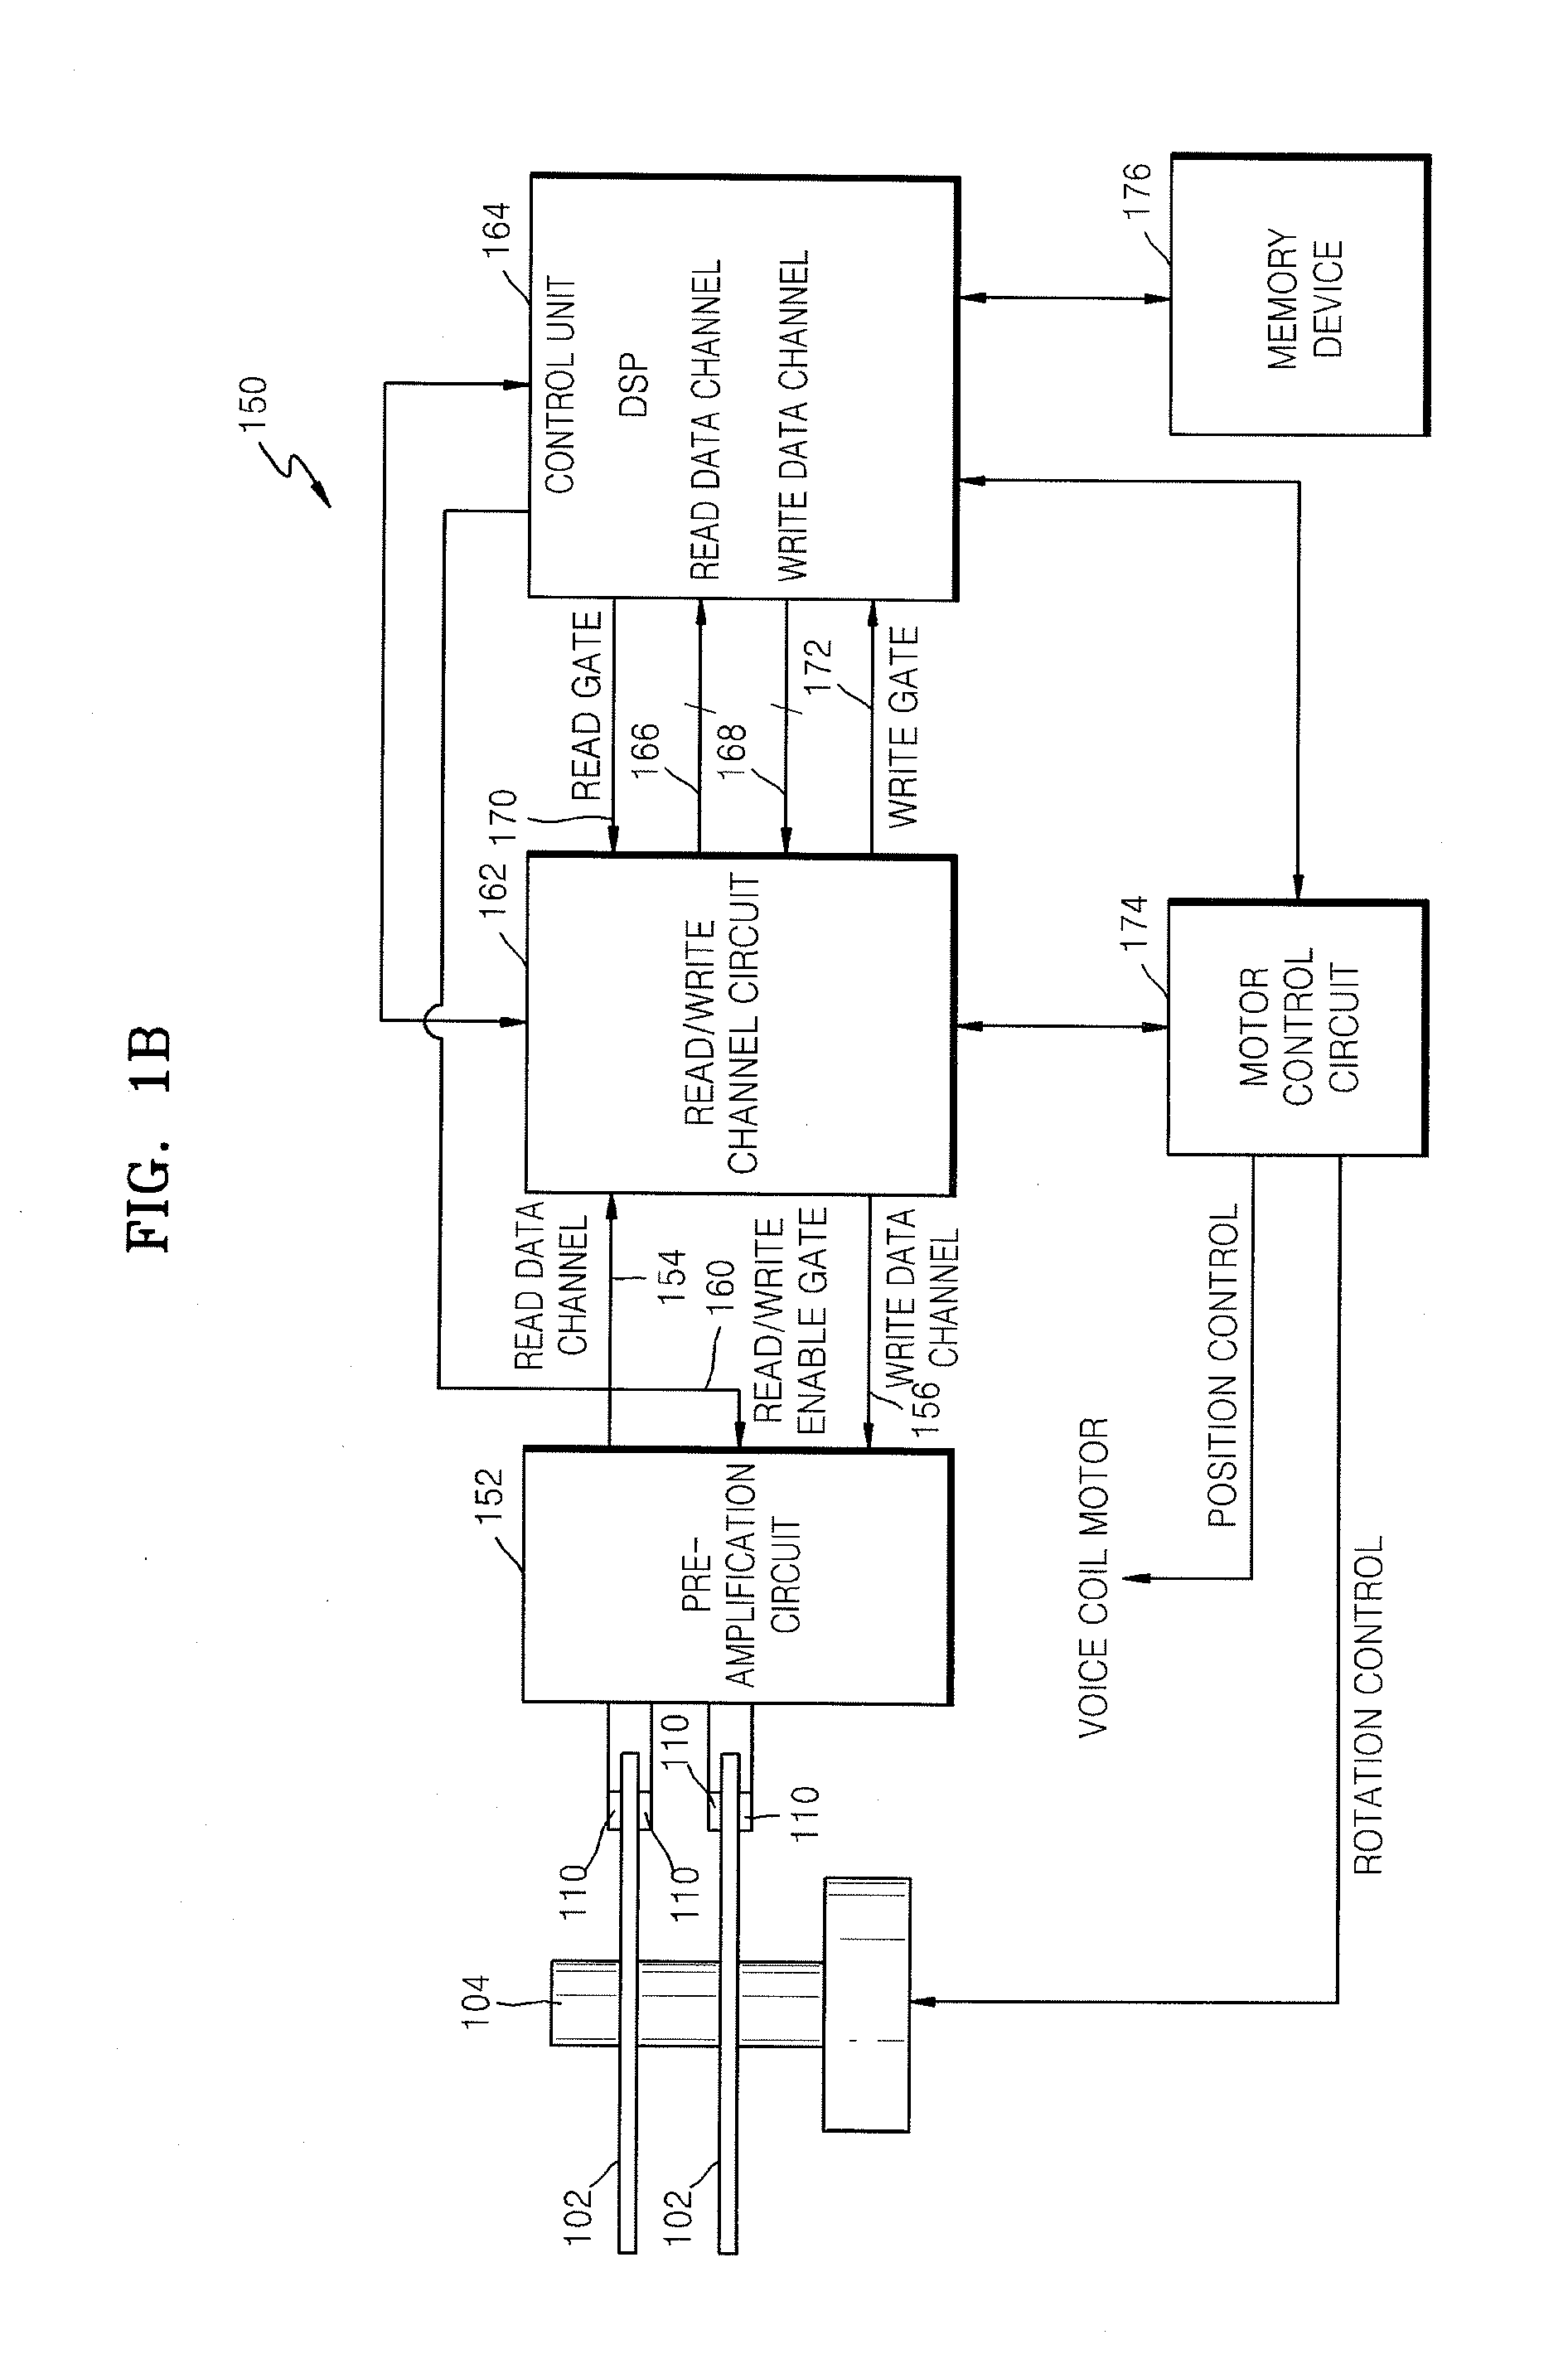 Hard disk drive having improved head stability at low temperature and method of applying current to a head of the hard disk drive